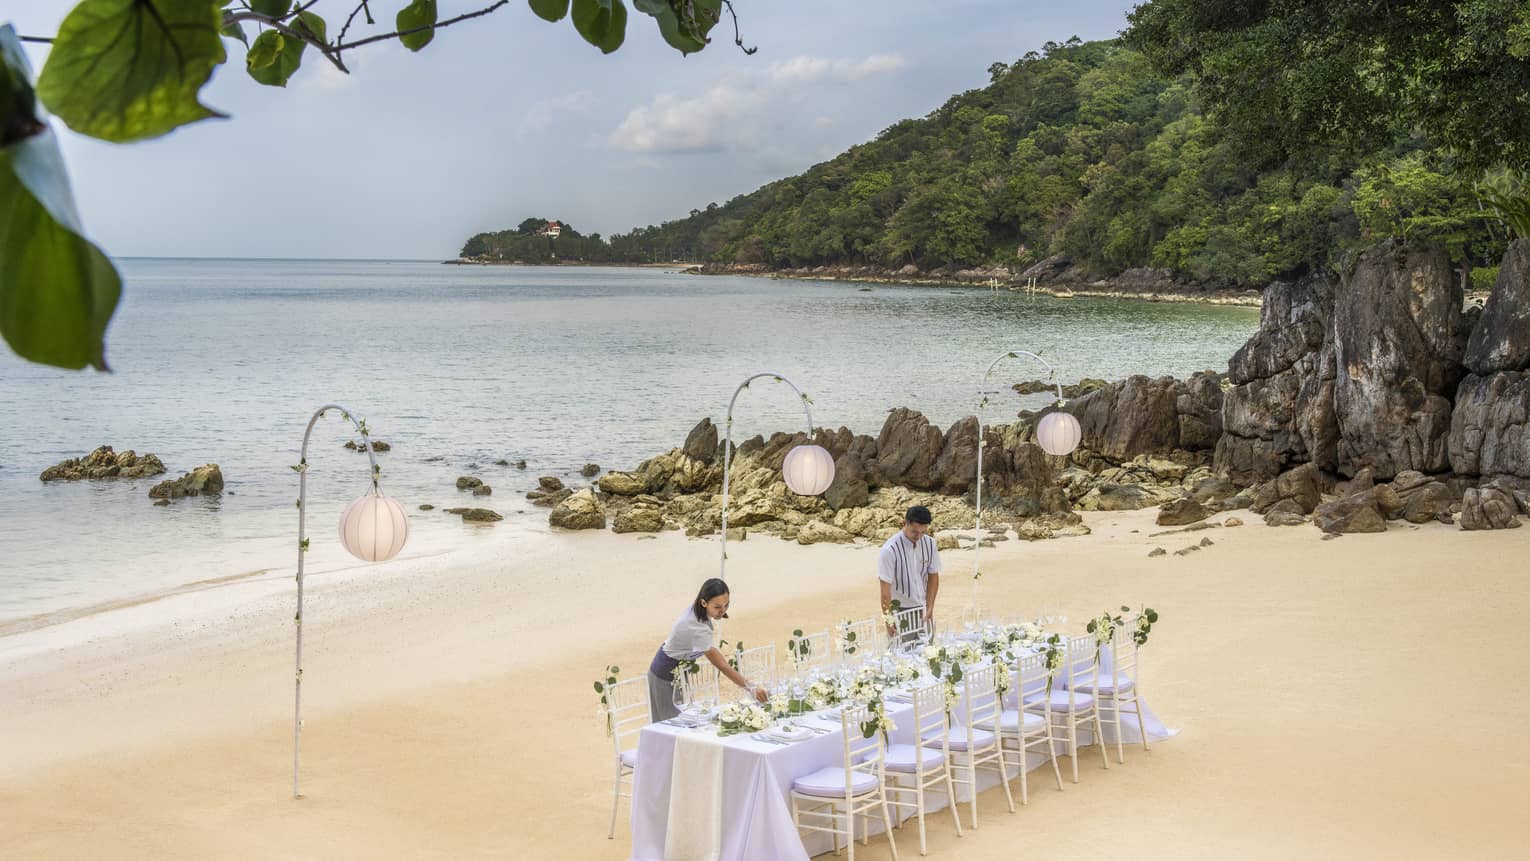 Team members set up a reception table on the beach